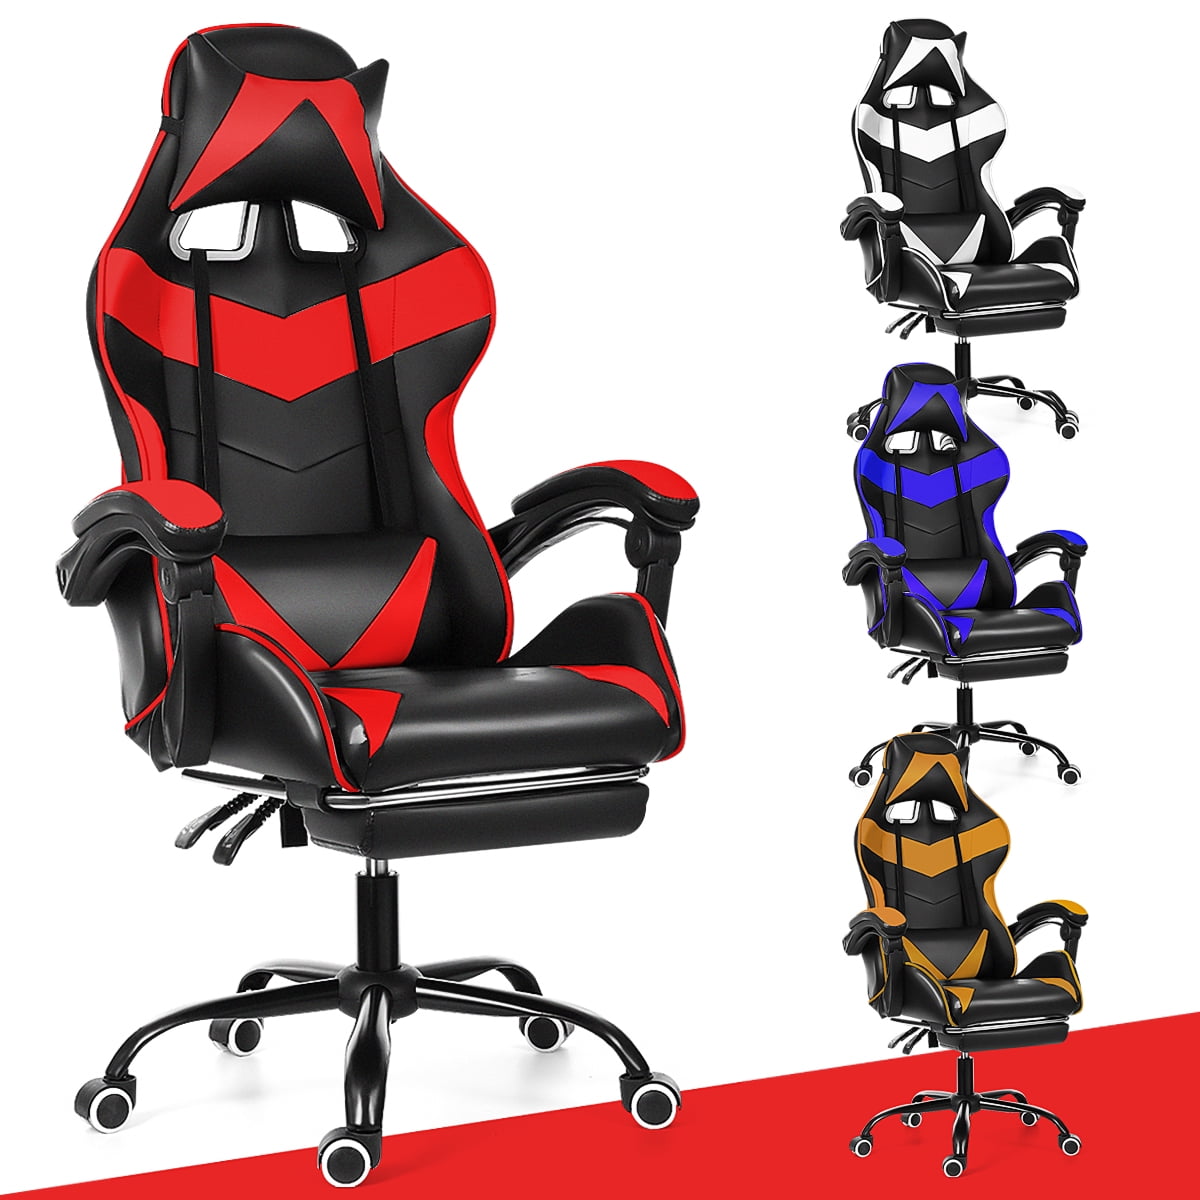 LENTIA Gaming Chair Adjustable Angle Reclining Computer Chair